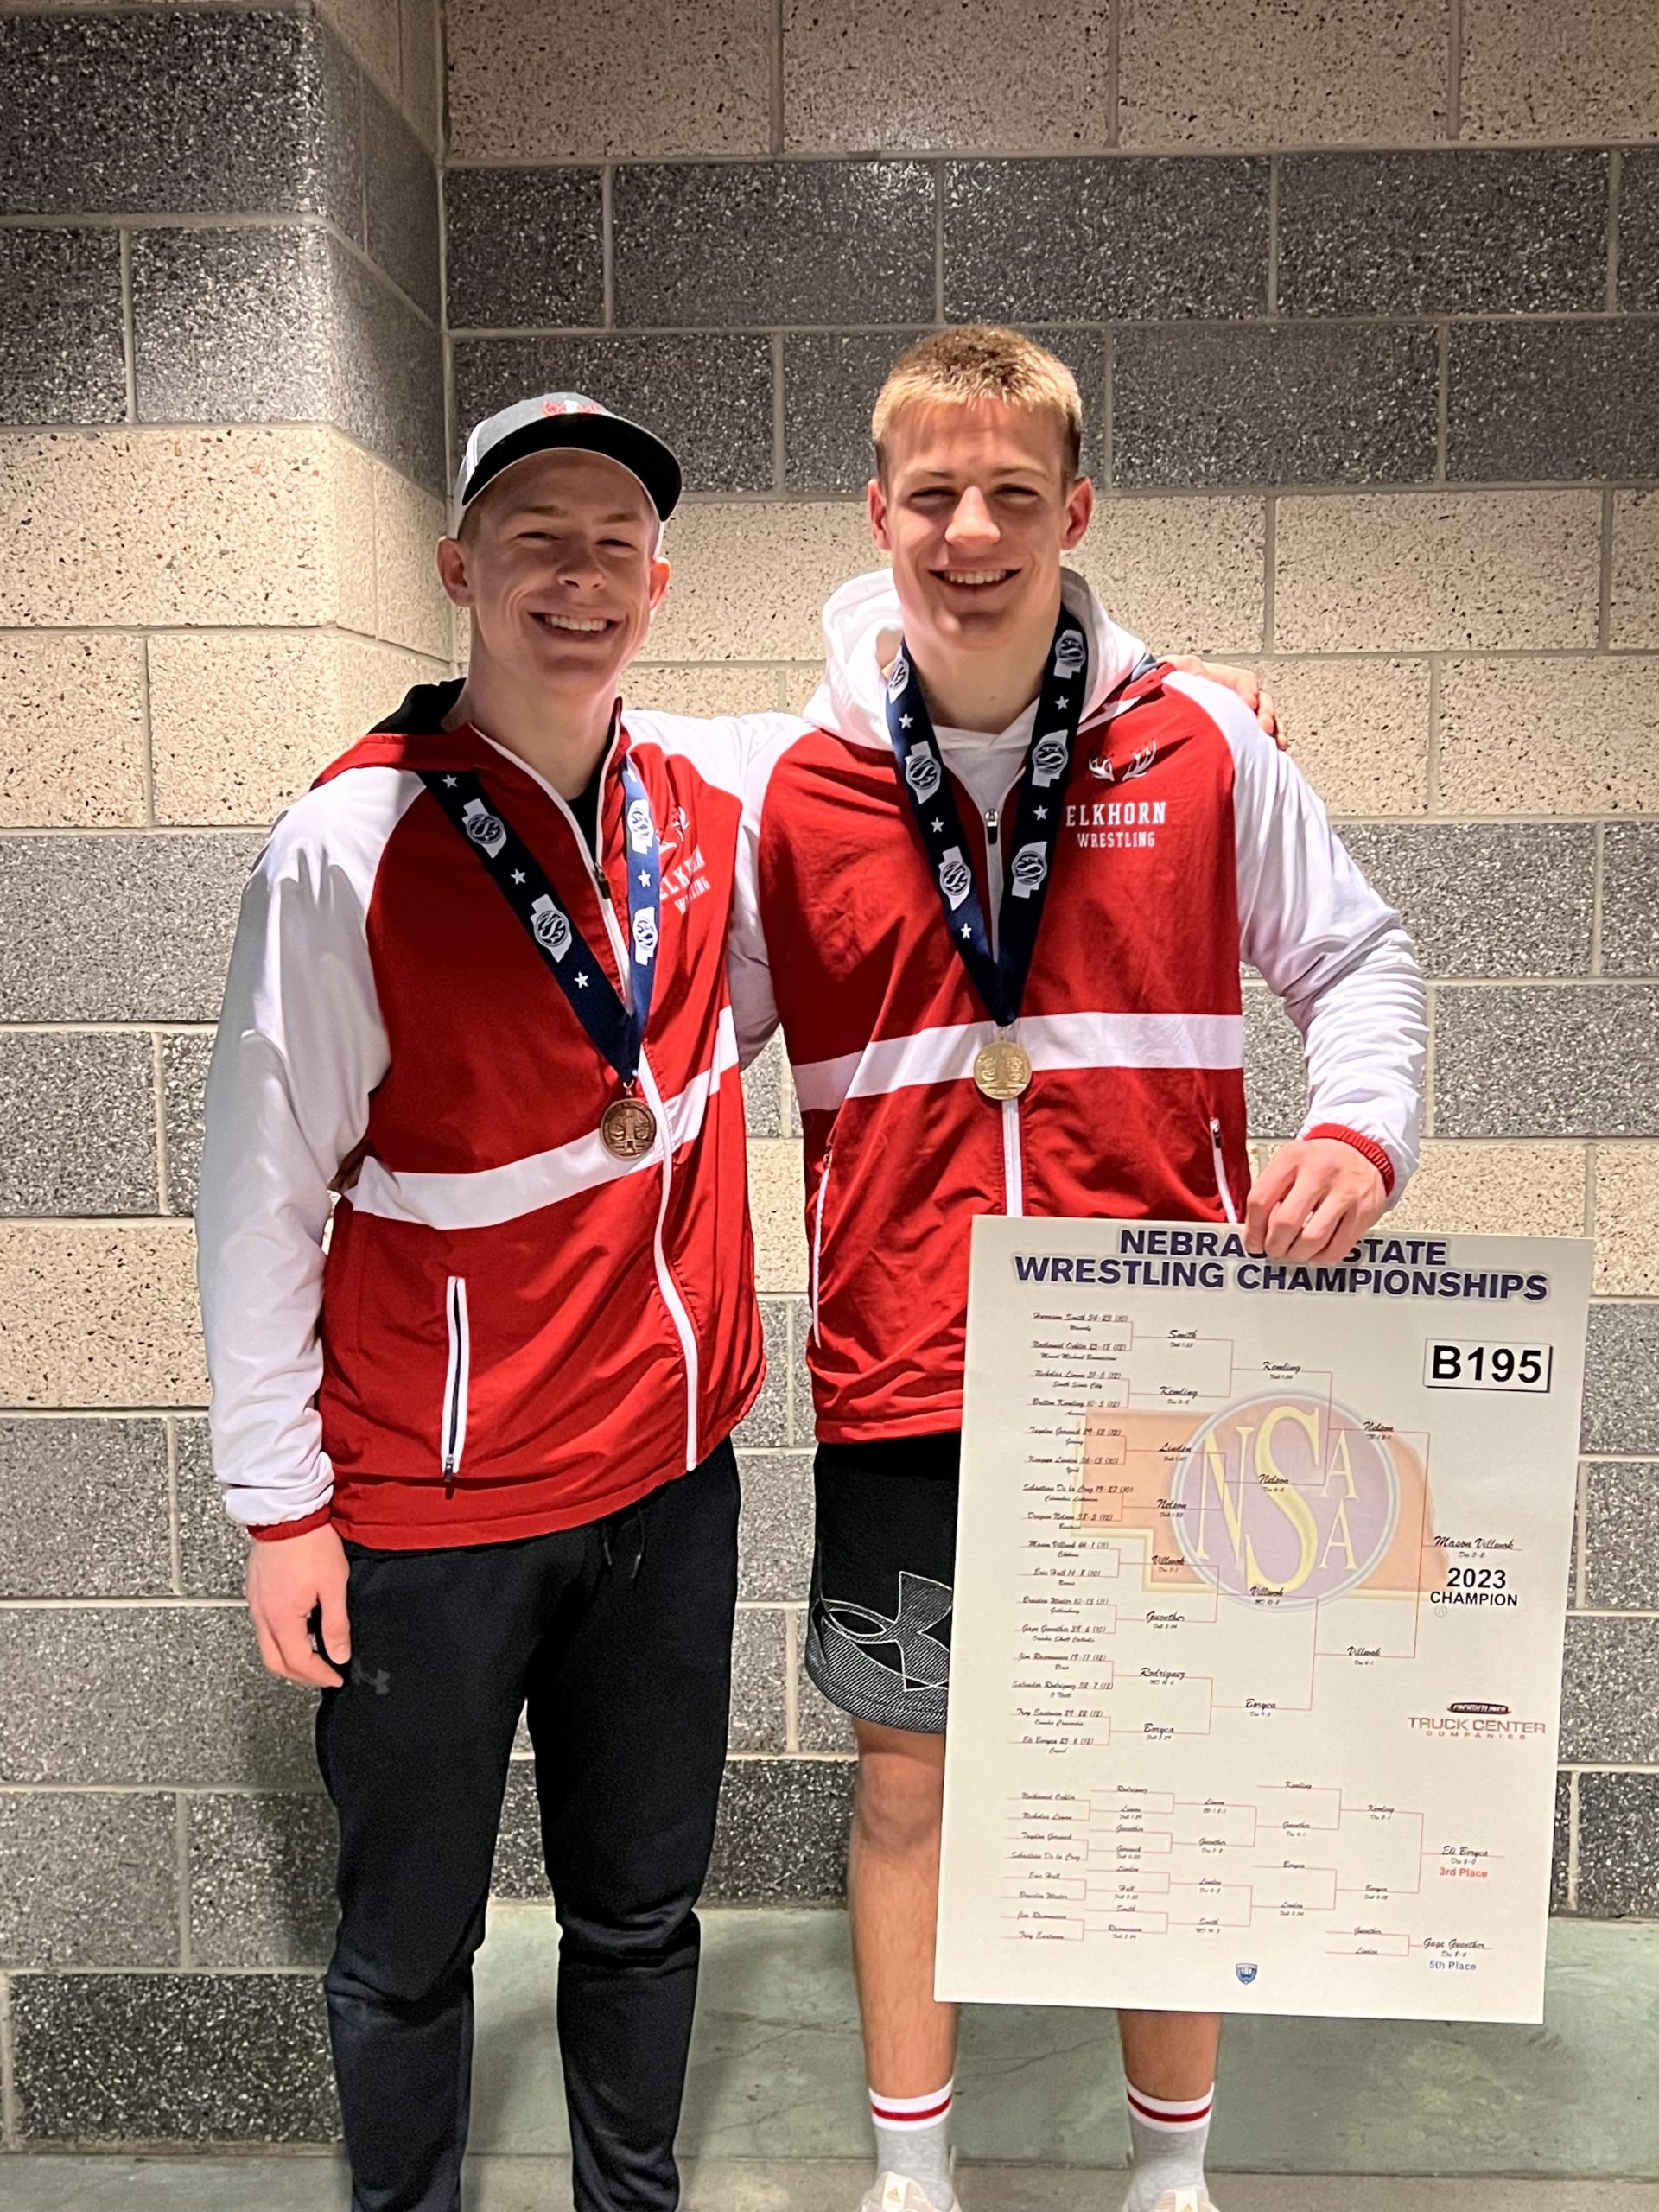 Mason Villwok and Sean Stara come together to congratulate each other on their win at state wrestling. Villwok received first place, and Stara received fifth place.